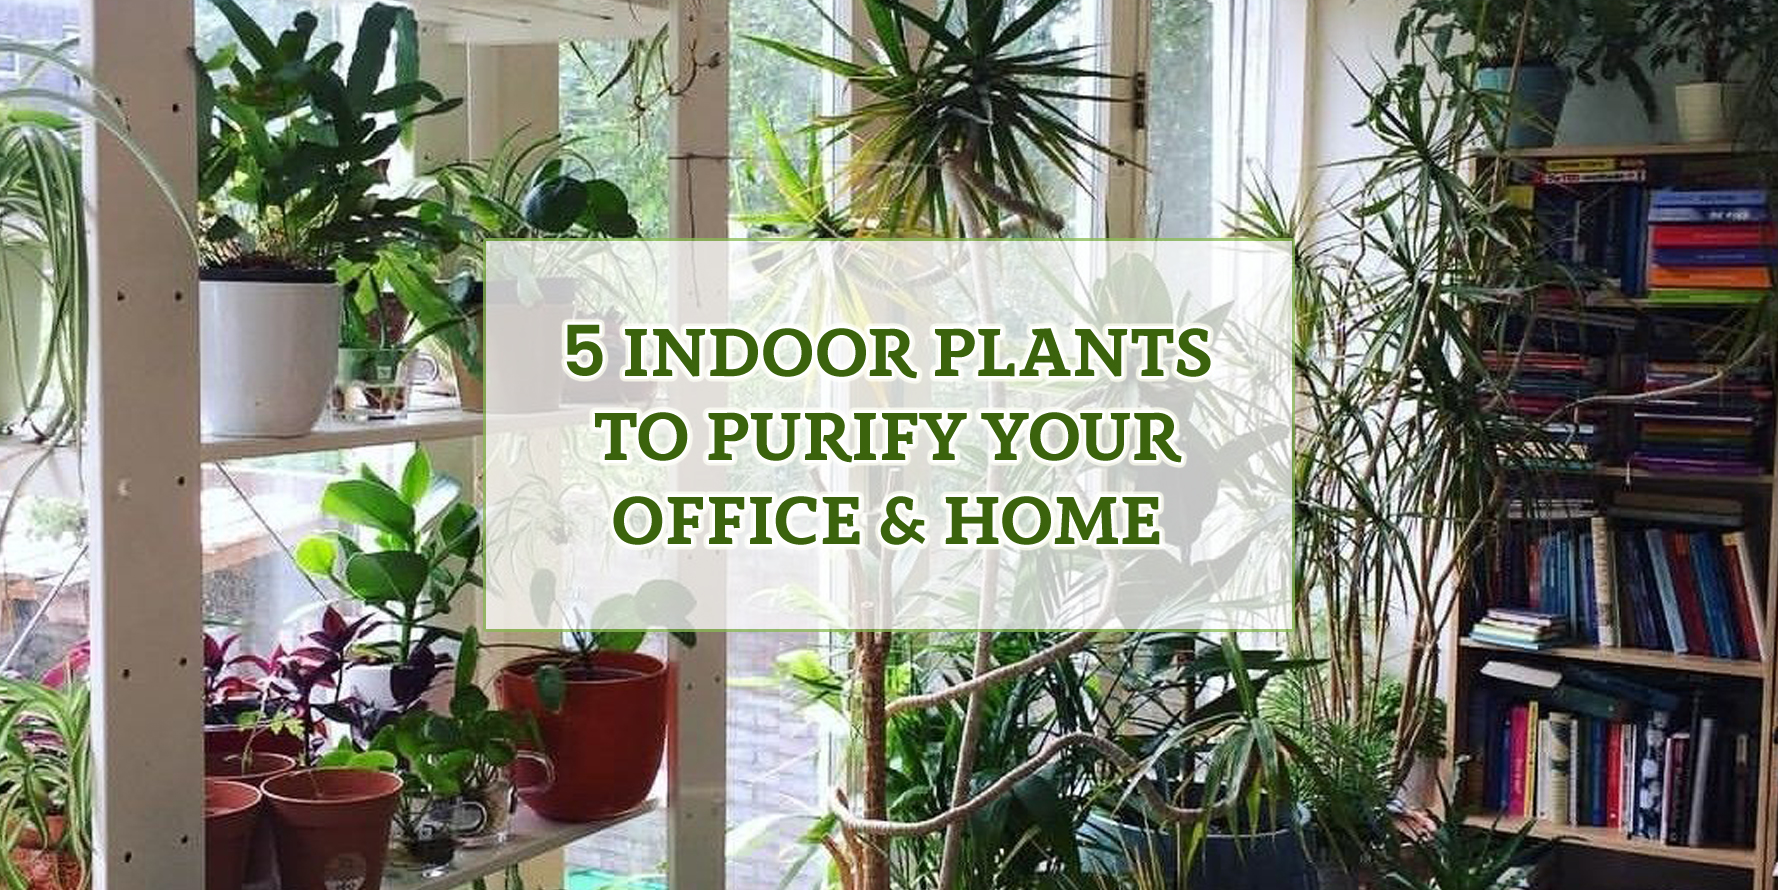 5 Indoor plants to purify your Office & Home